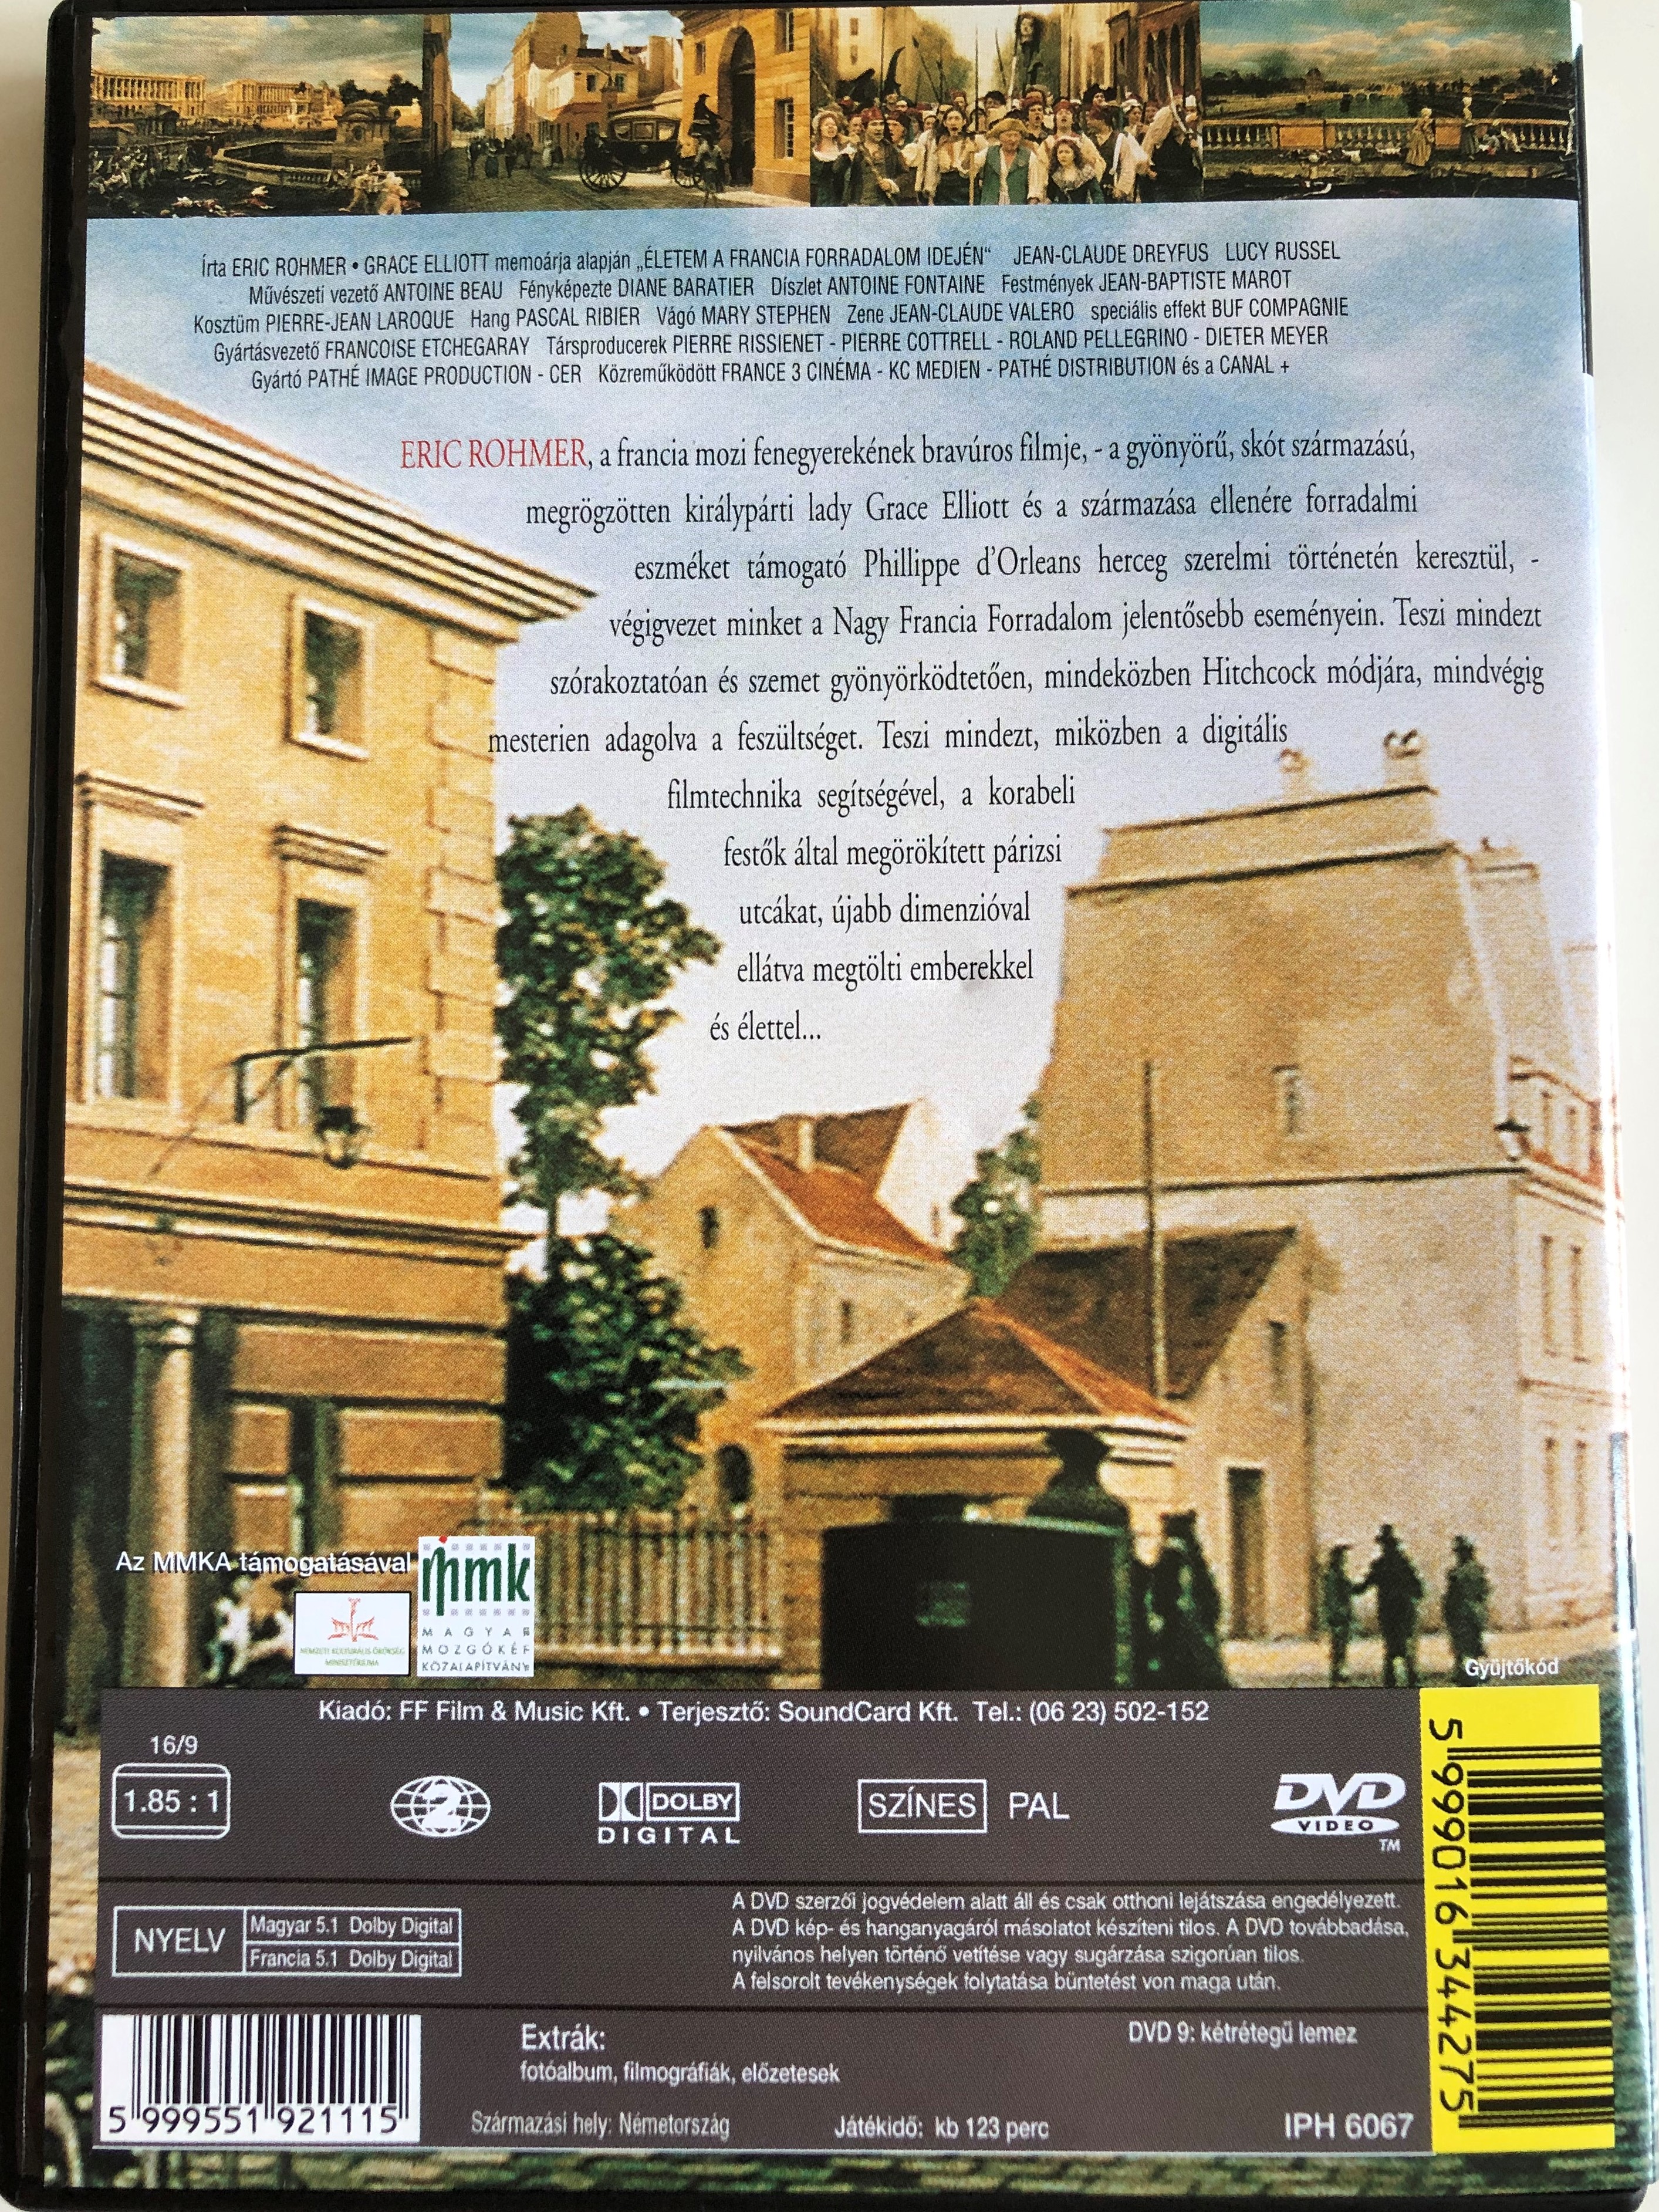 l-anglaise-et-le-duc-dvd-2001-egy-h-lgy-s-a-herceg-directed-by-eric-rohmer-starring-jean-claude-dreyfus-lucy-russell-5.1-hungarian-audio-2-.jpg